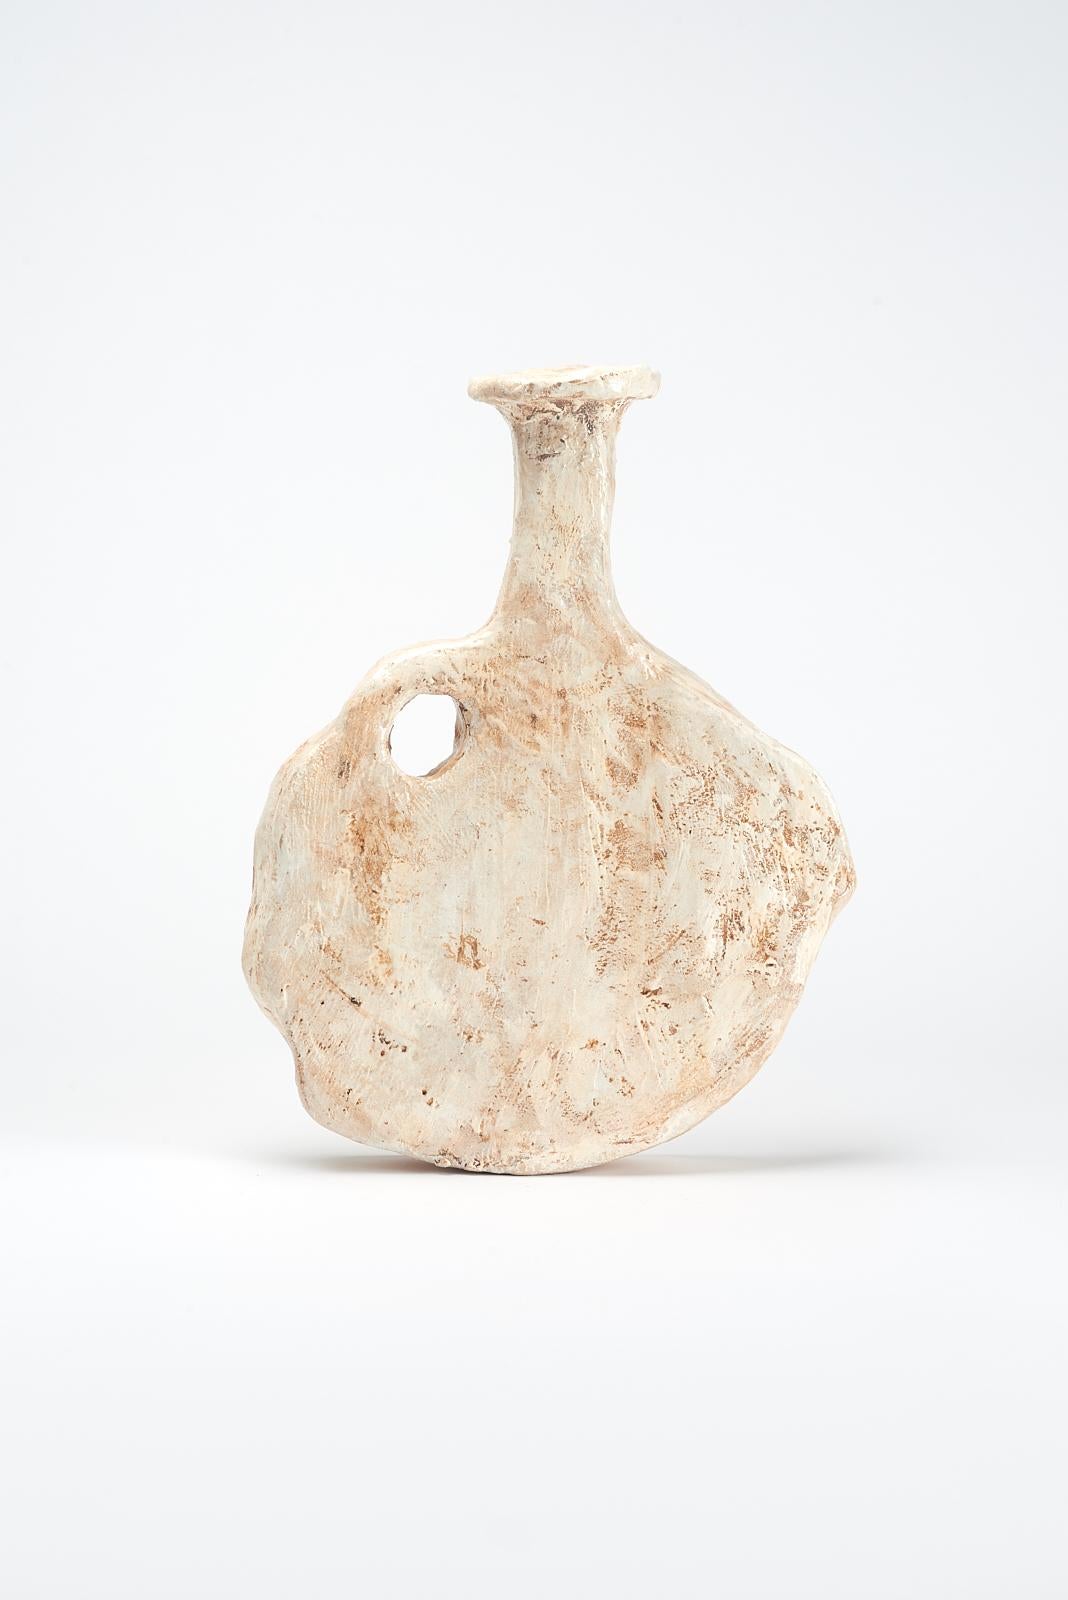 Uso vase by Willem Van Hooff
Dimensions: W 35 x H 24 cm
Materials: Earthenware, ceramic, pigments and glaze

Willem van Hooff is a designer based in Eindhoven.
He is a driven builder, were he likes to see design as his tool to express a